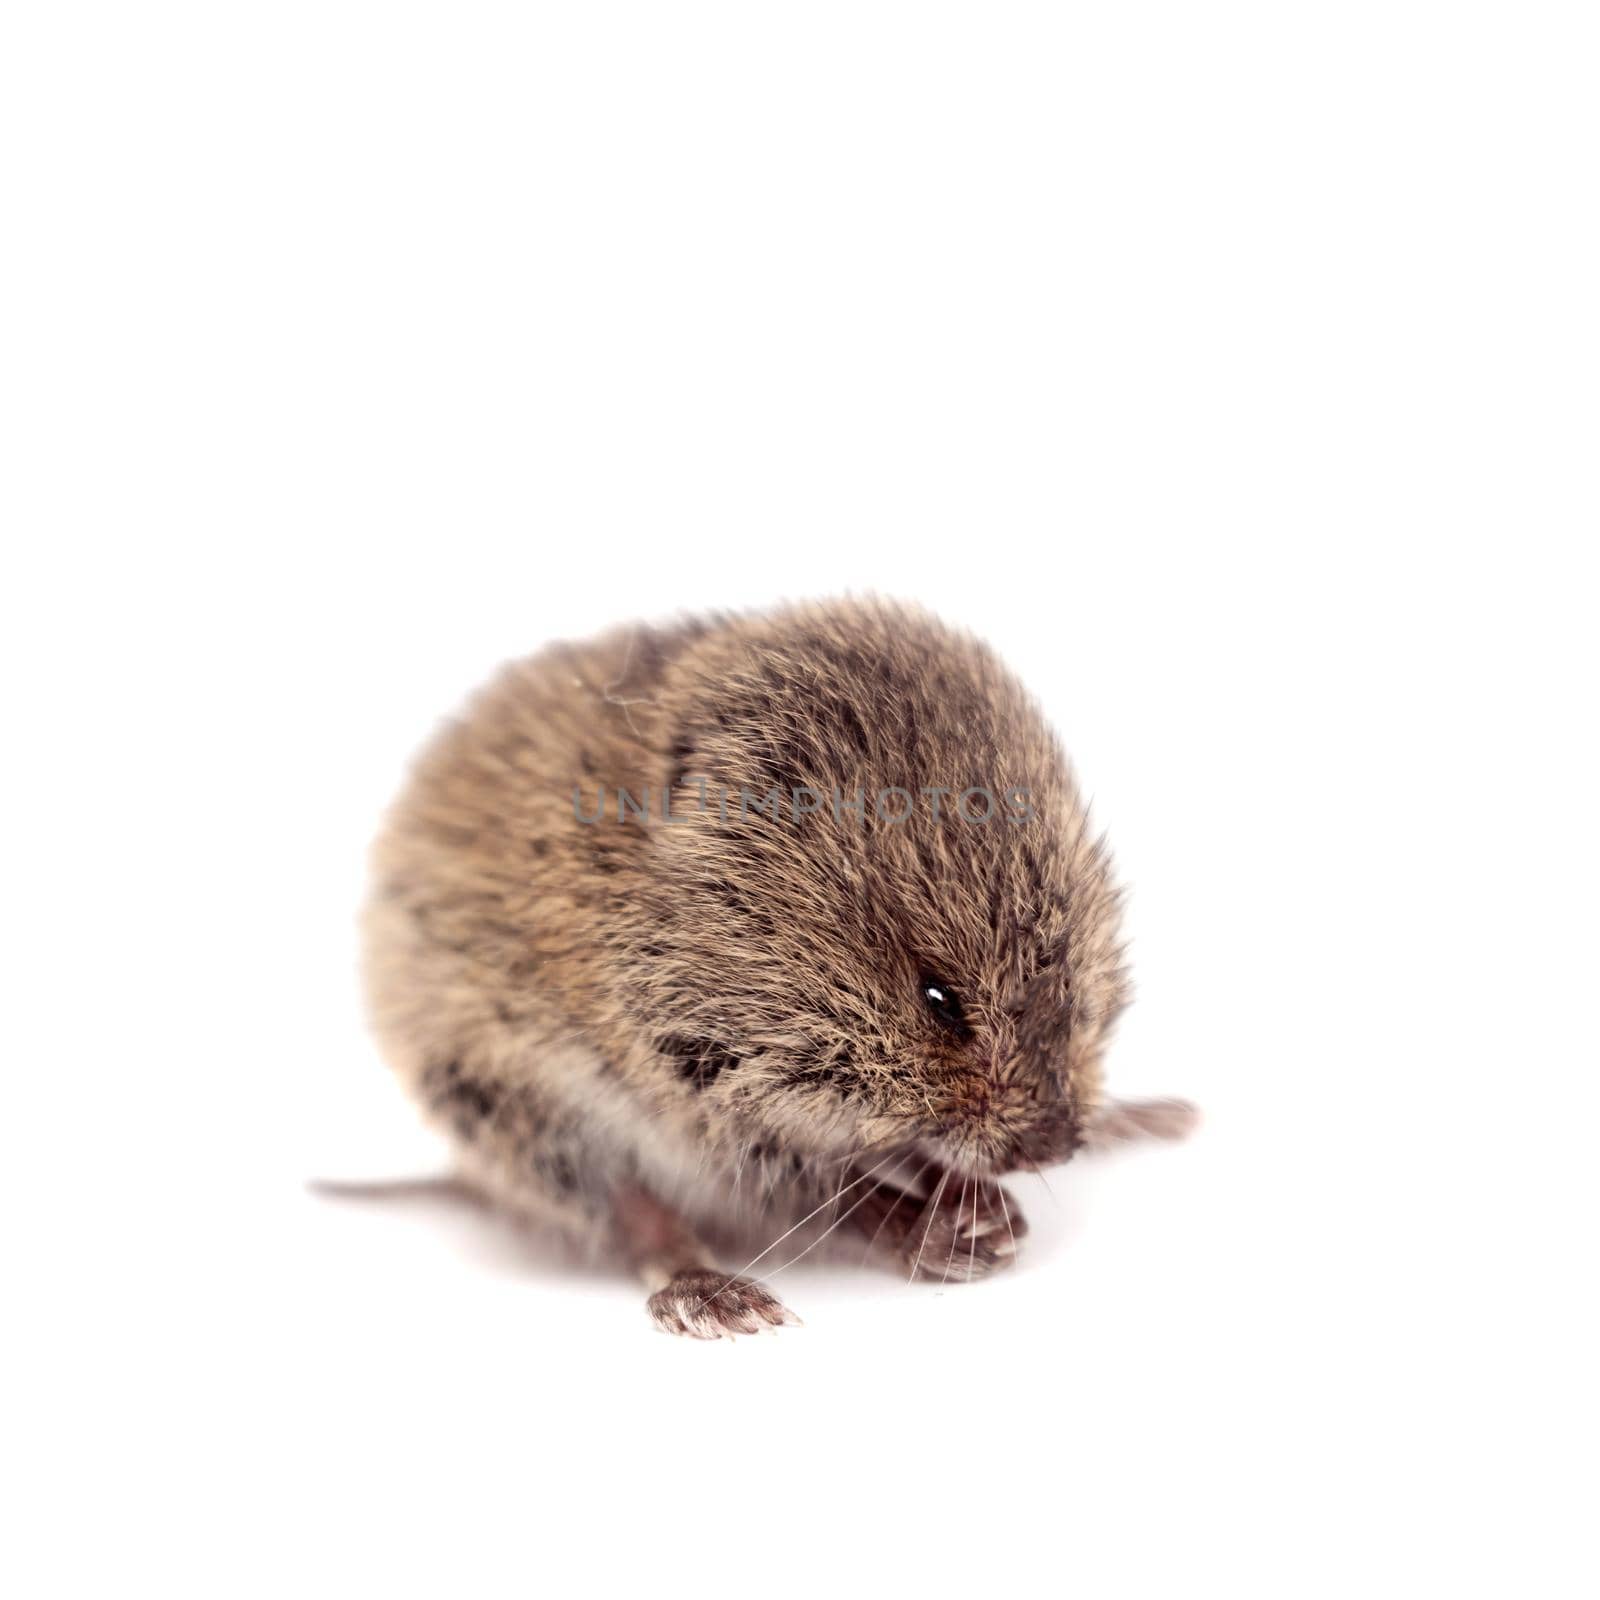 Common Vole, 3 weeks old, on white by RosaJay